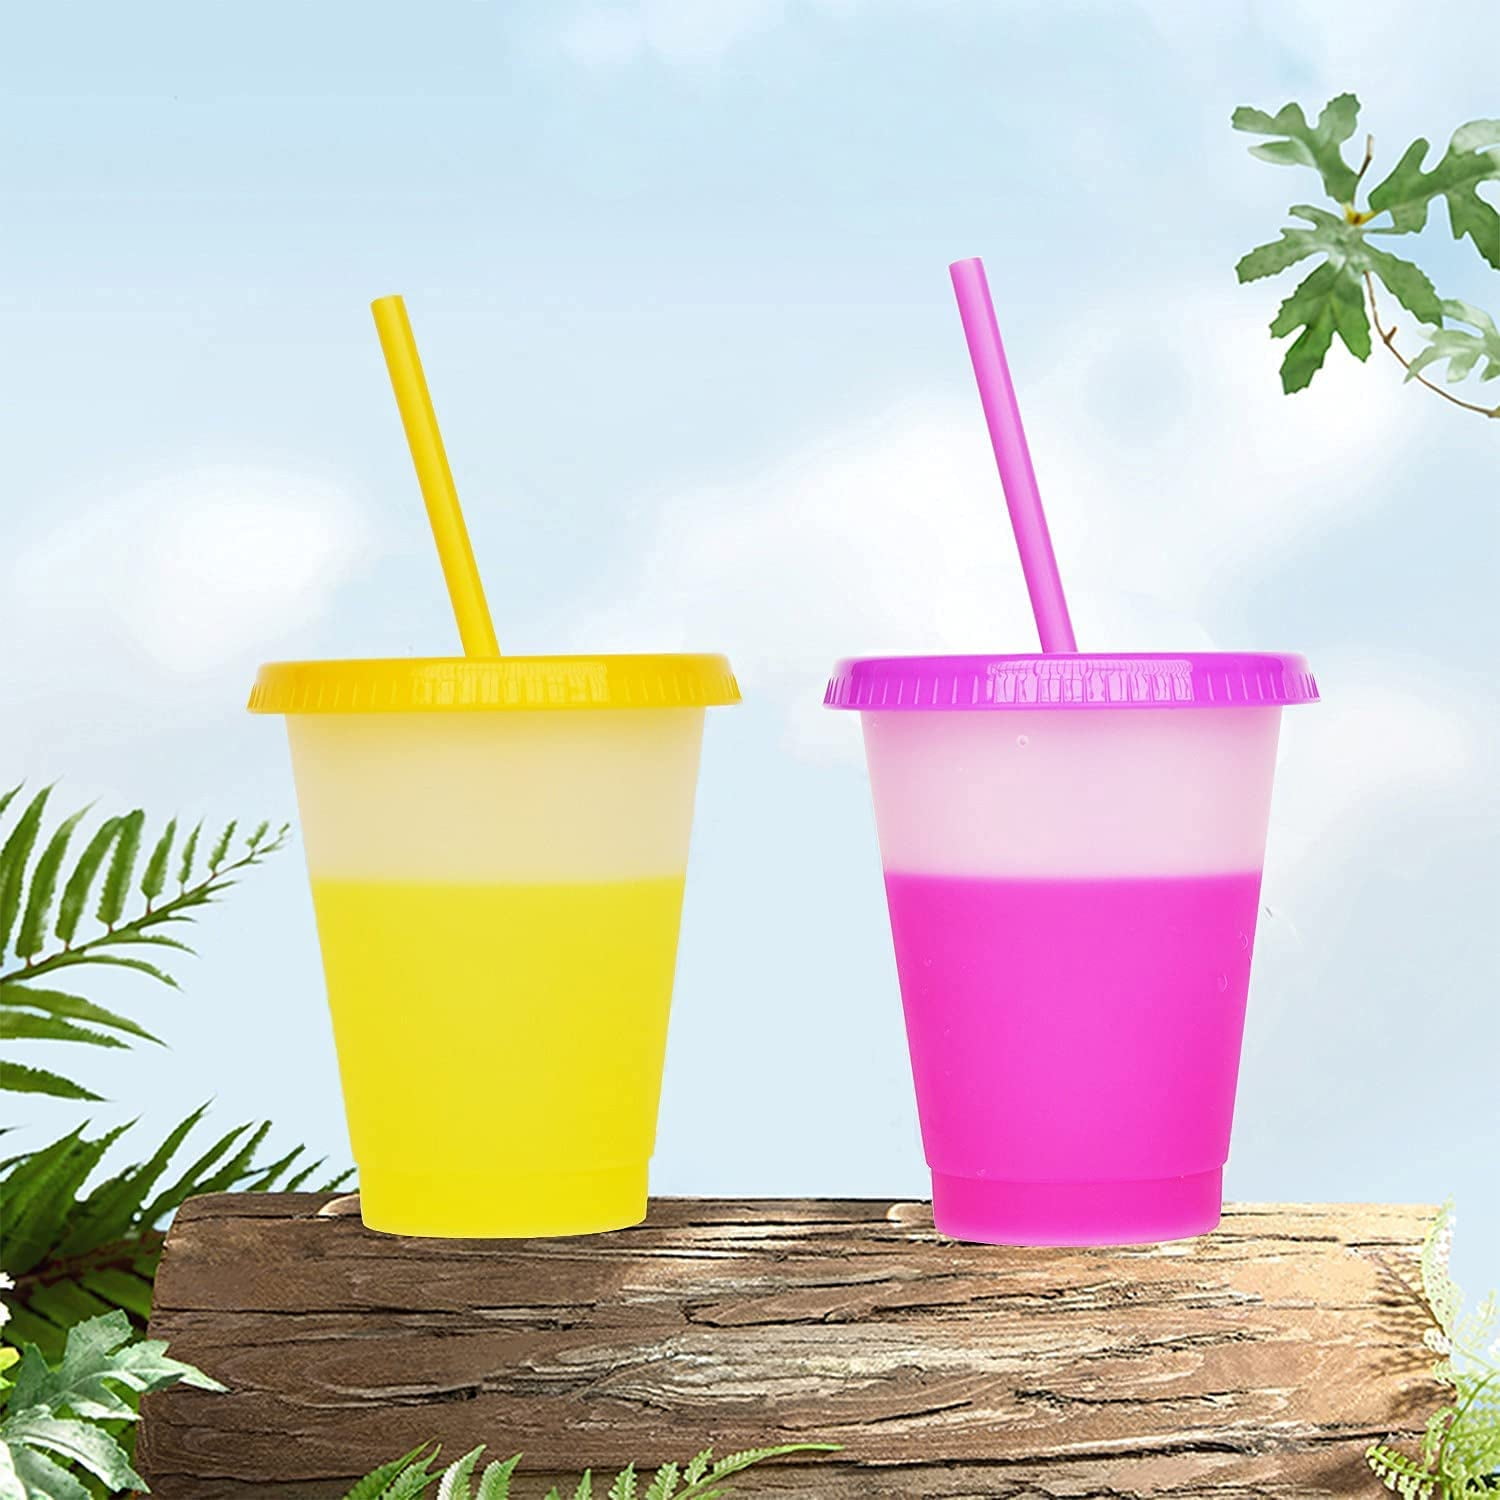 Kids Cups with Lids and Straws, 12oz Kids Tumblers with Straws and Lids  Spill Proof Cups for Kids St…See more Kids Cups with Lids and Straws, 12oz